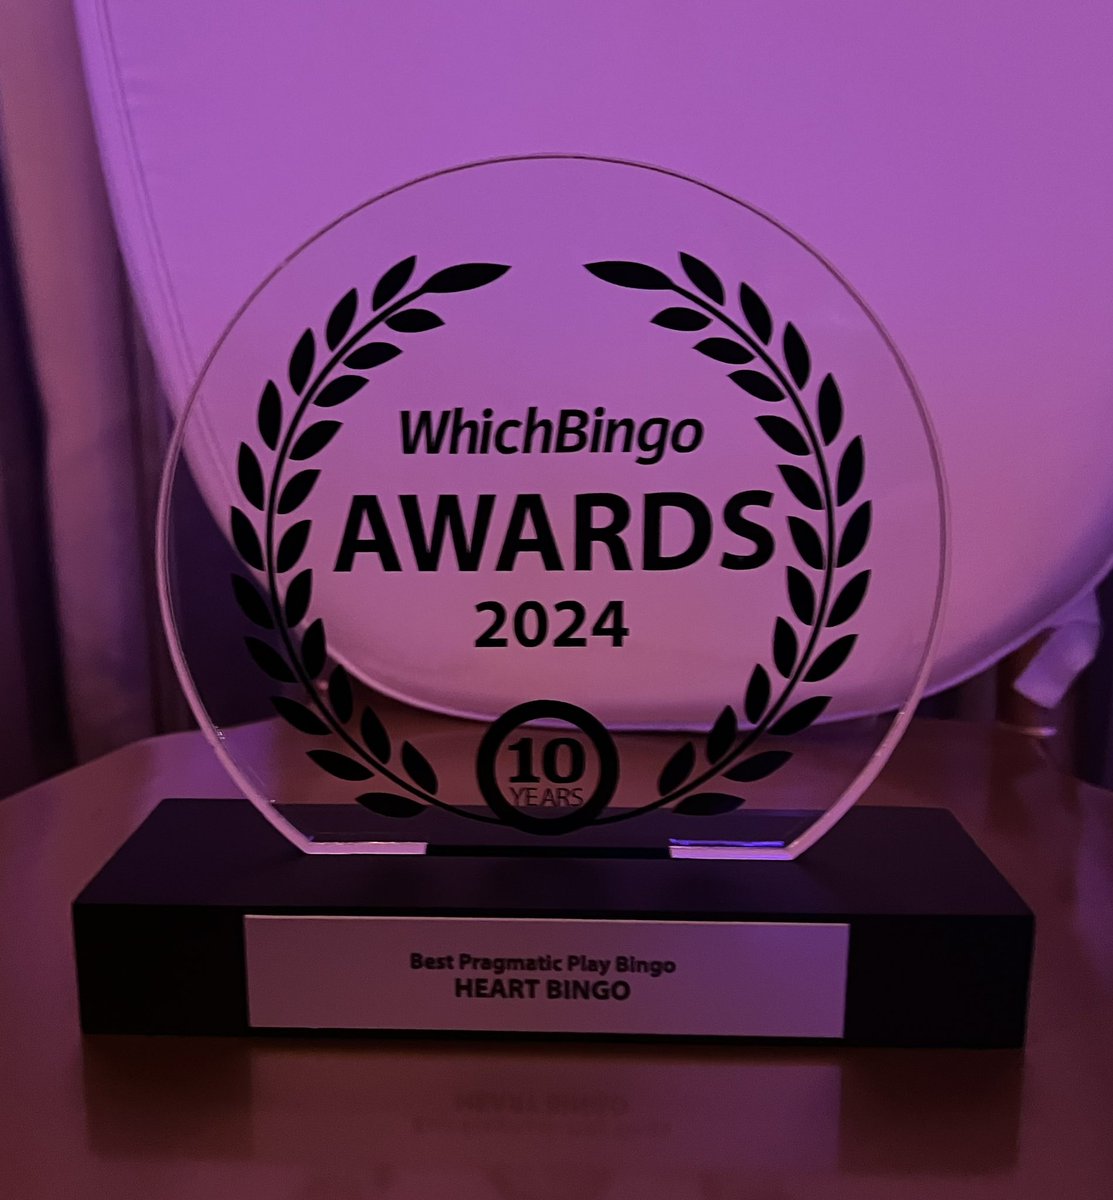 We did it Hearties! We won the best Pragmatic Play Bingo Site at the @WhichBingoUK awards 2024. Let’s hope there are many more to come ❤️